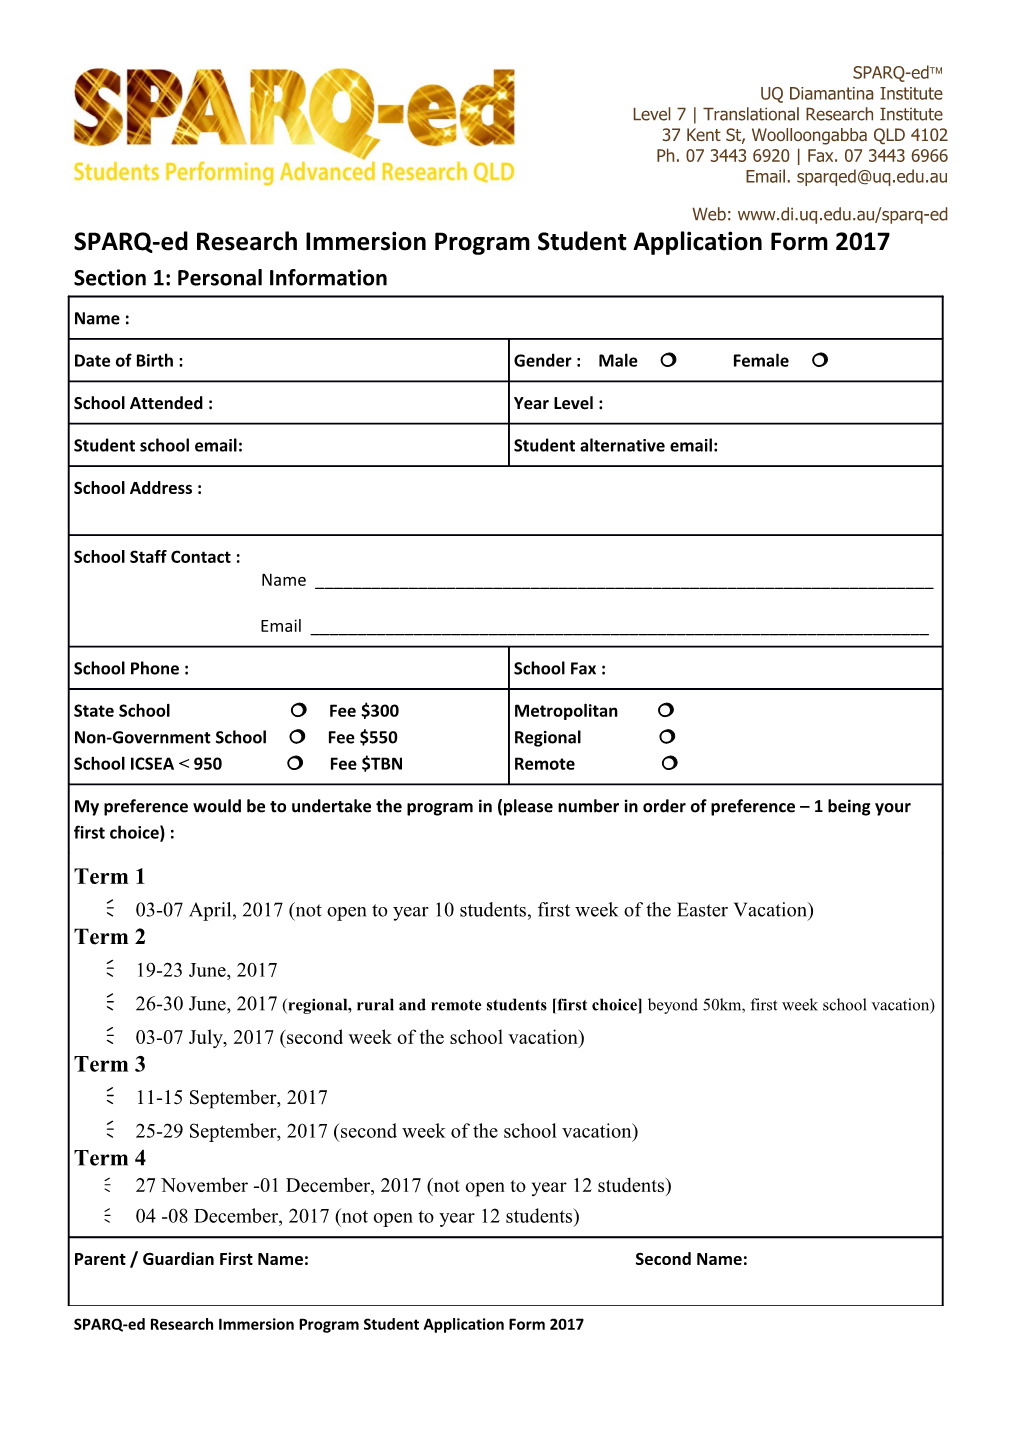 SPARQ-Ed Research Immersion Program Student Application Form2017